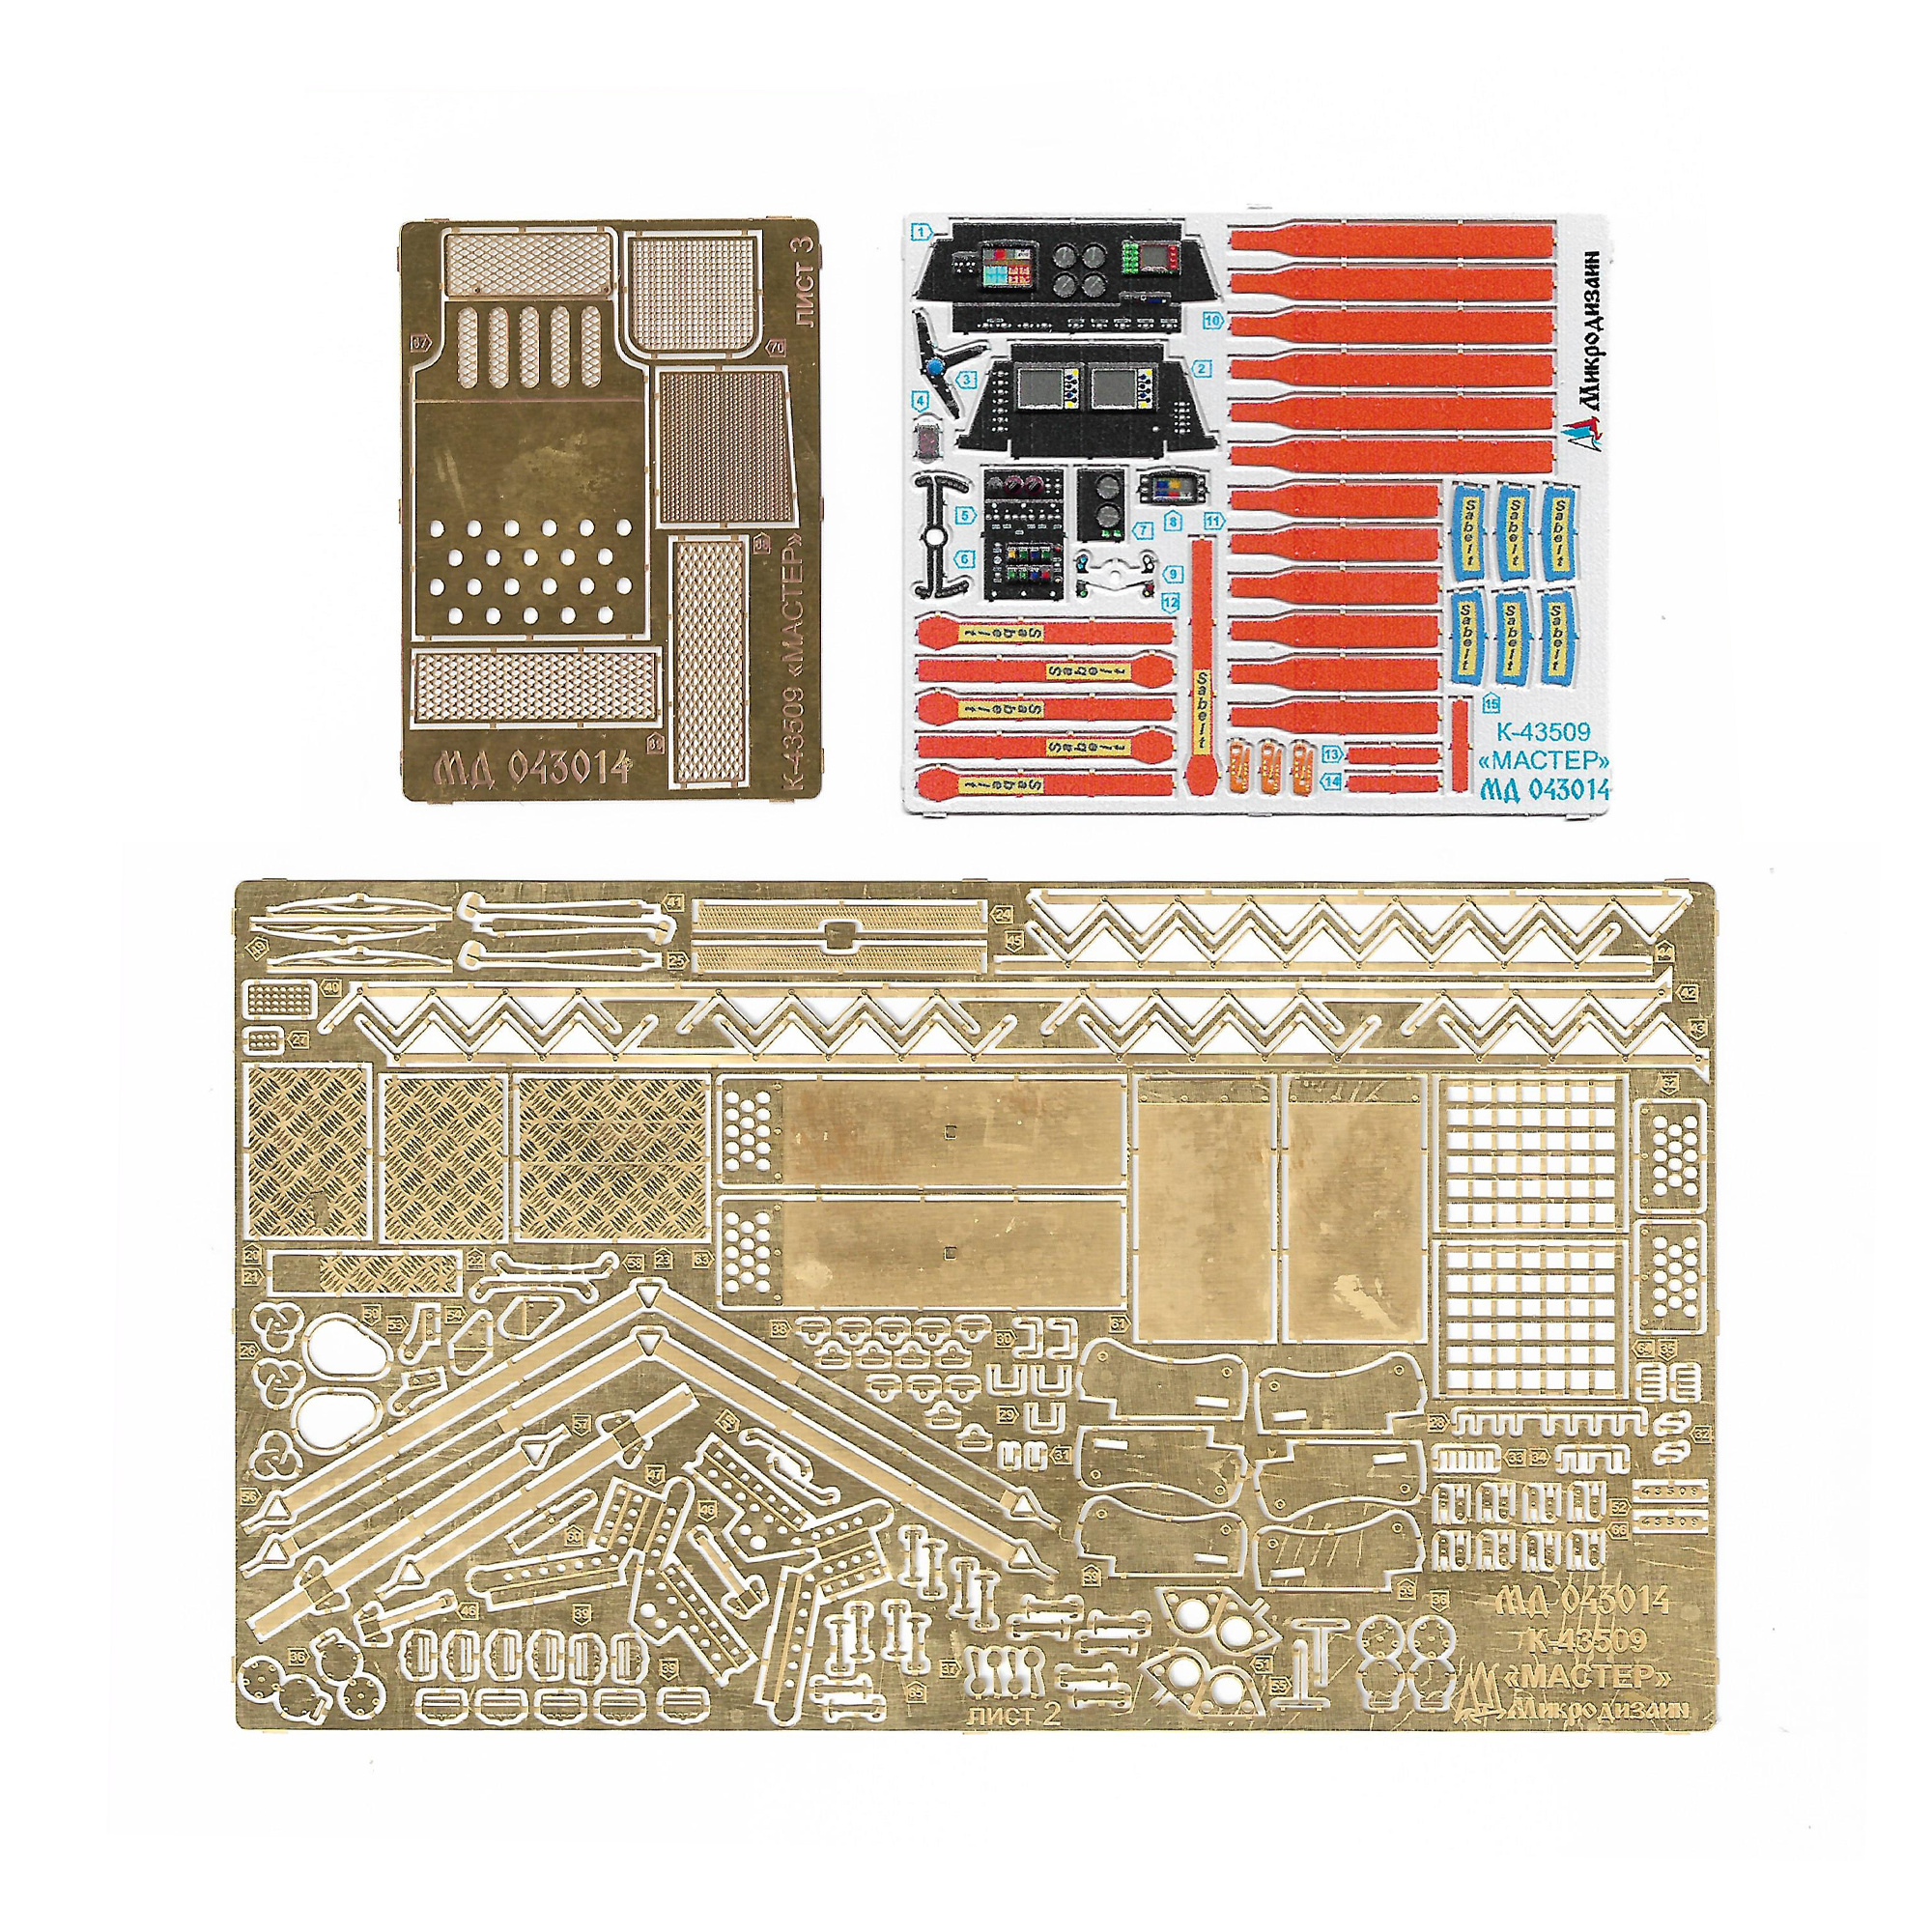 043014 Microdesign 1/43 Photo etching kit for the K-43509 